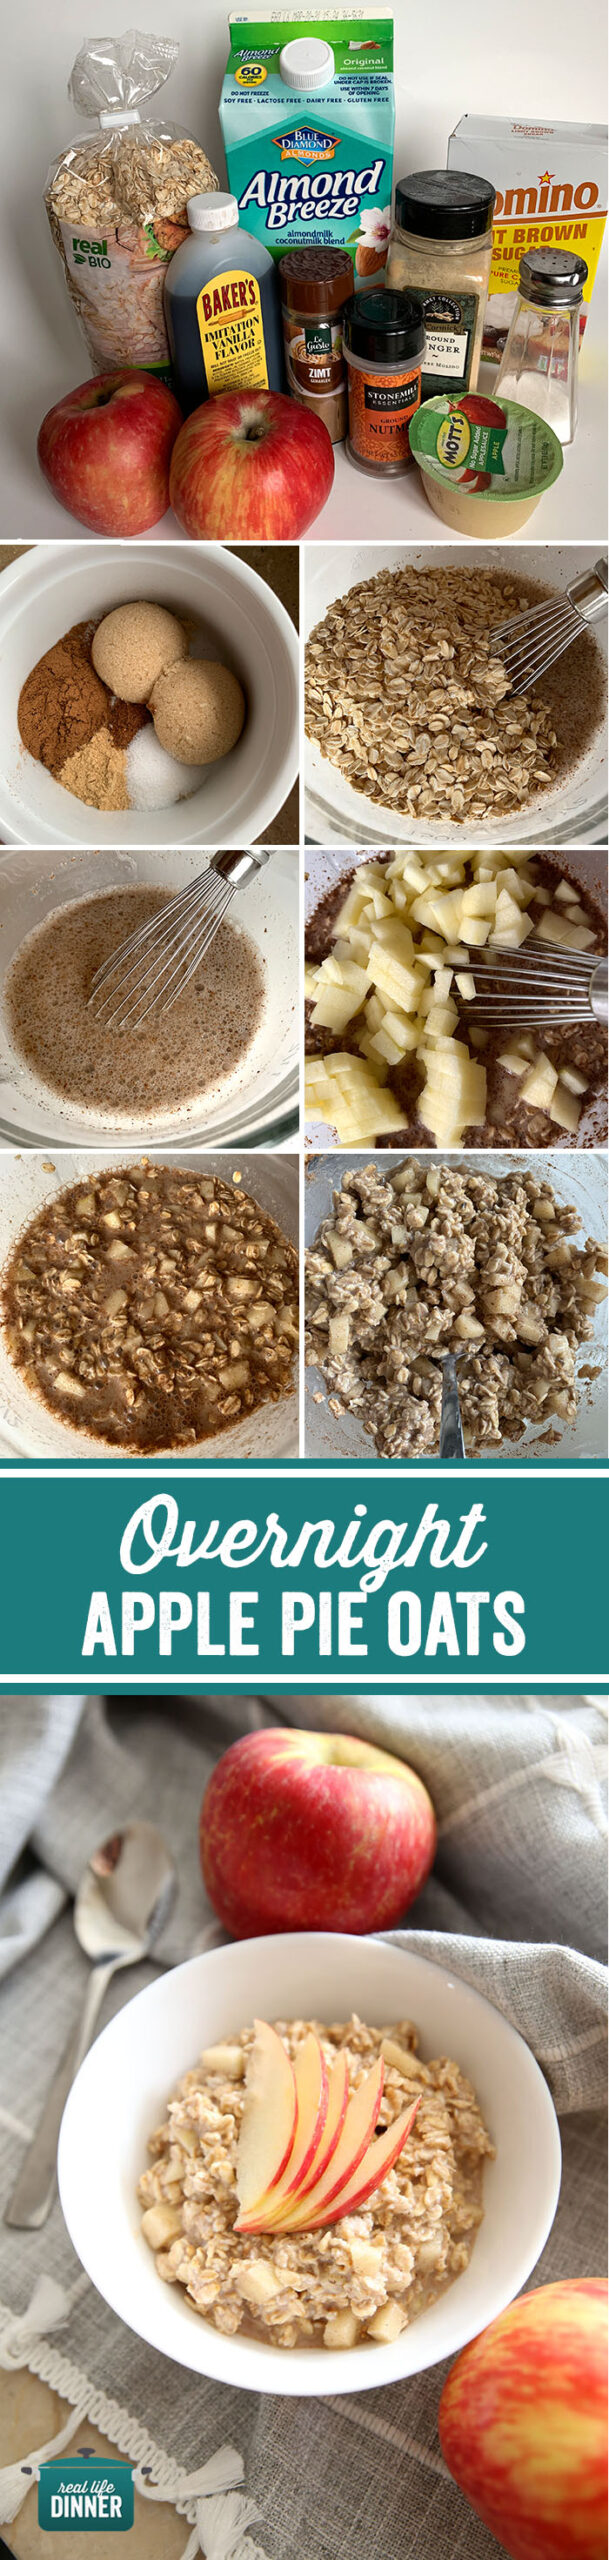 Collage picture of how to make Overnight Apple Pie Oats and a picture of the finished product